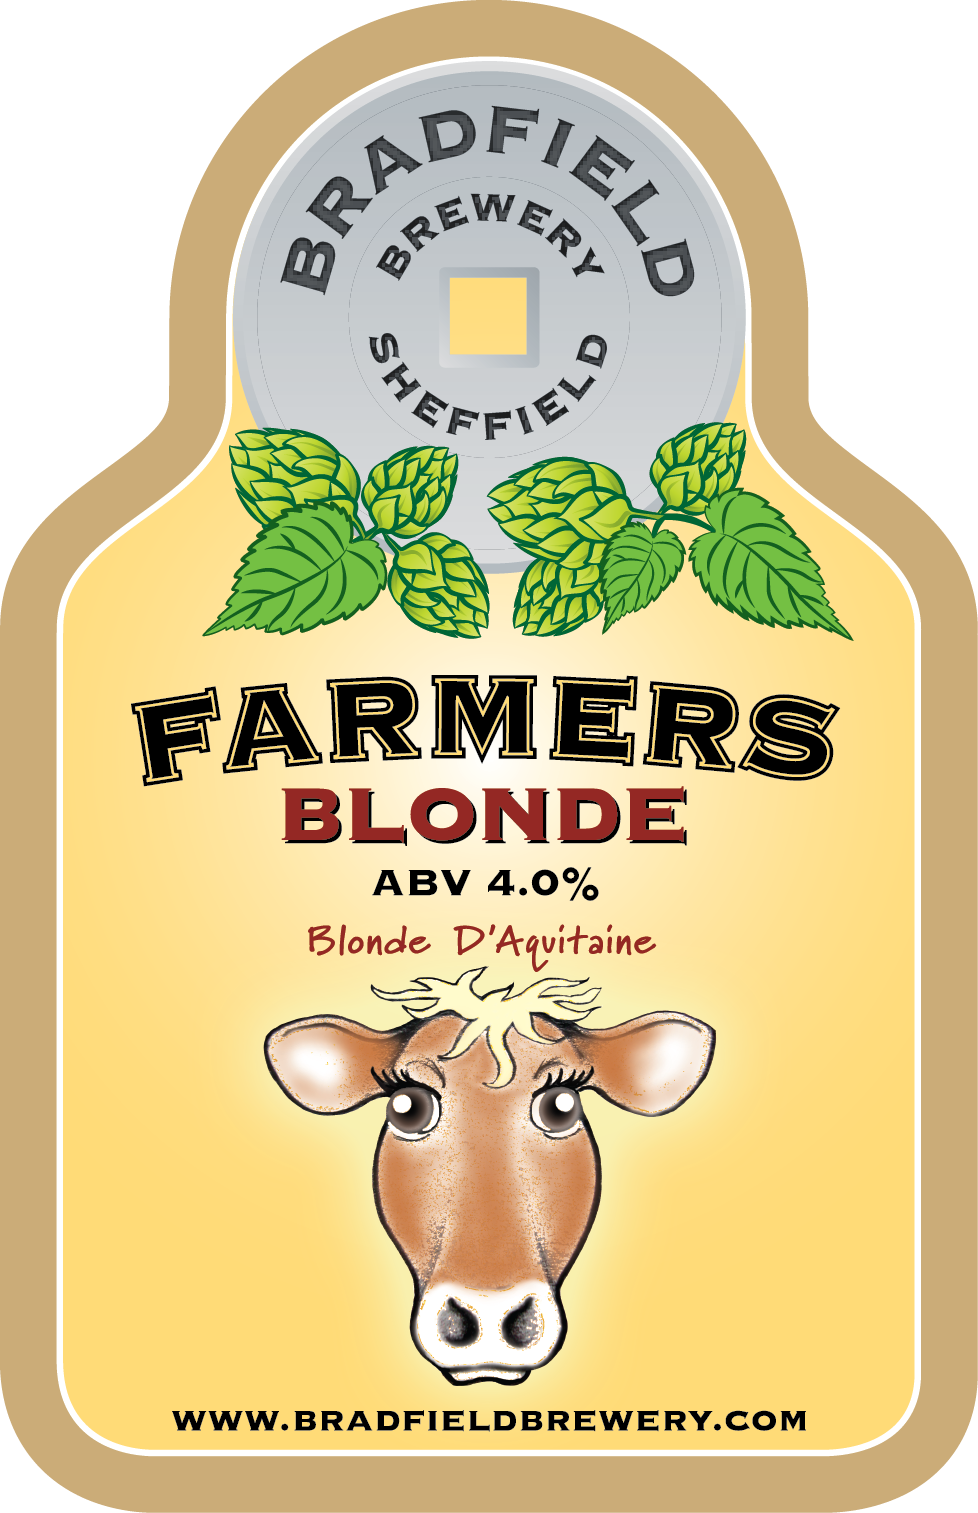 Farmers Blonde scoops another Industry Award!